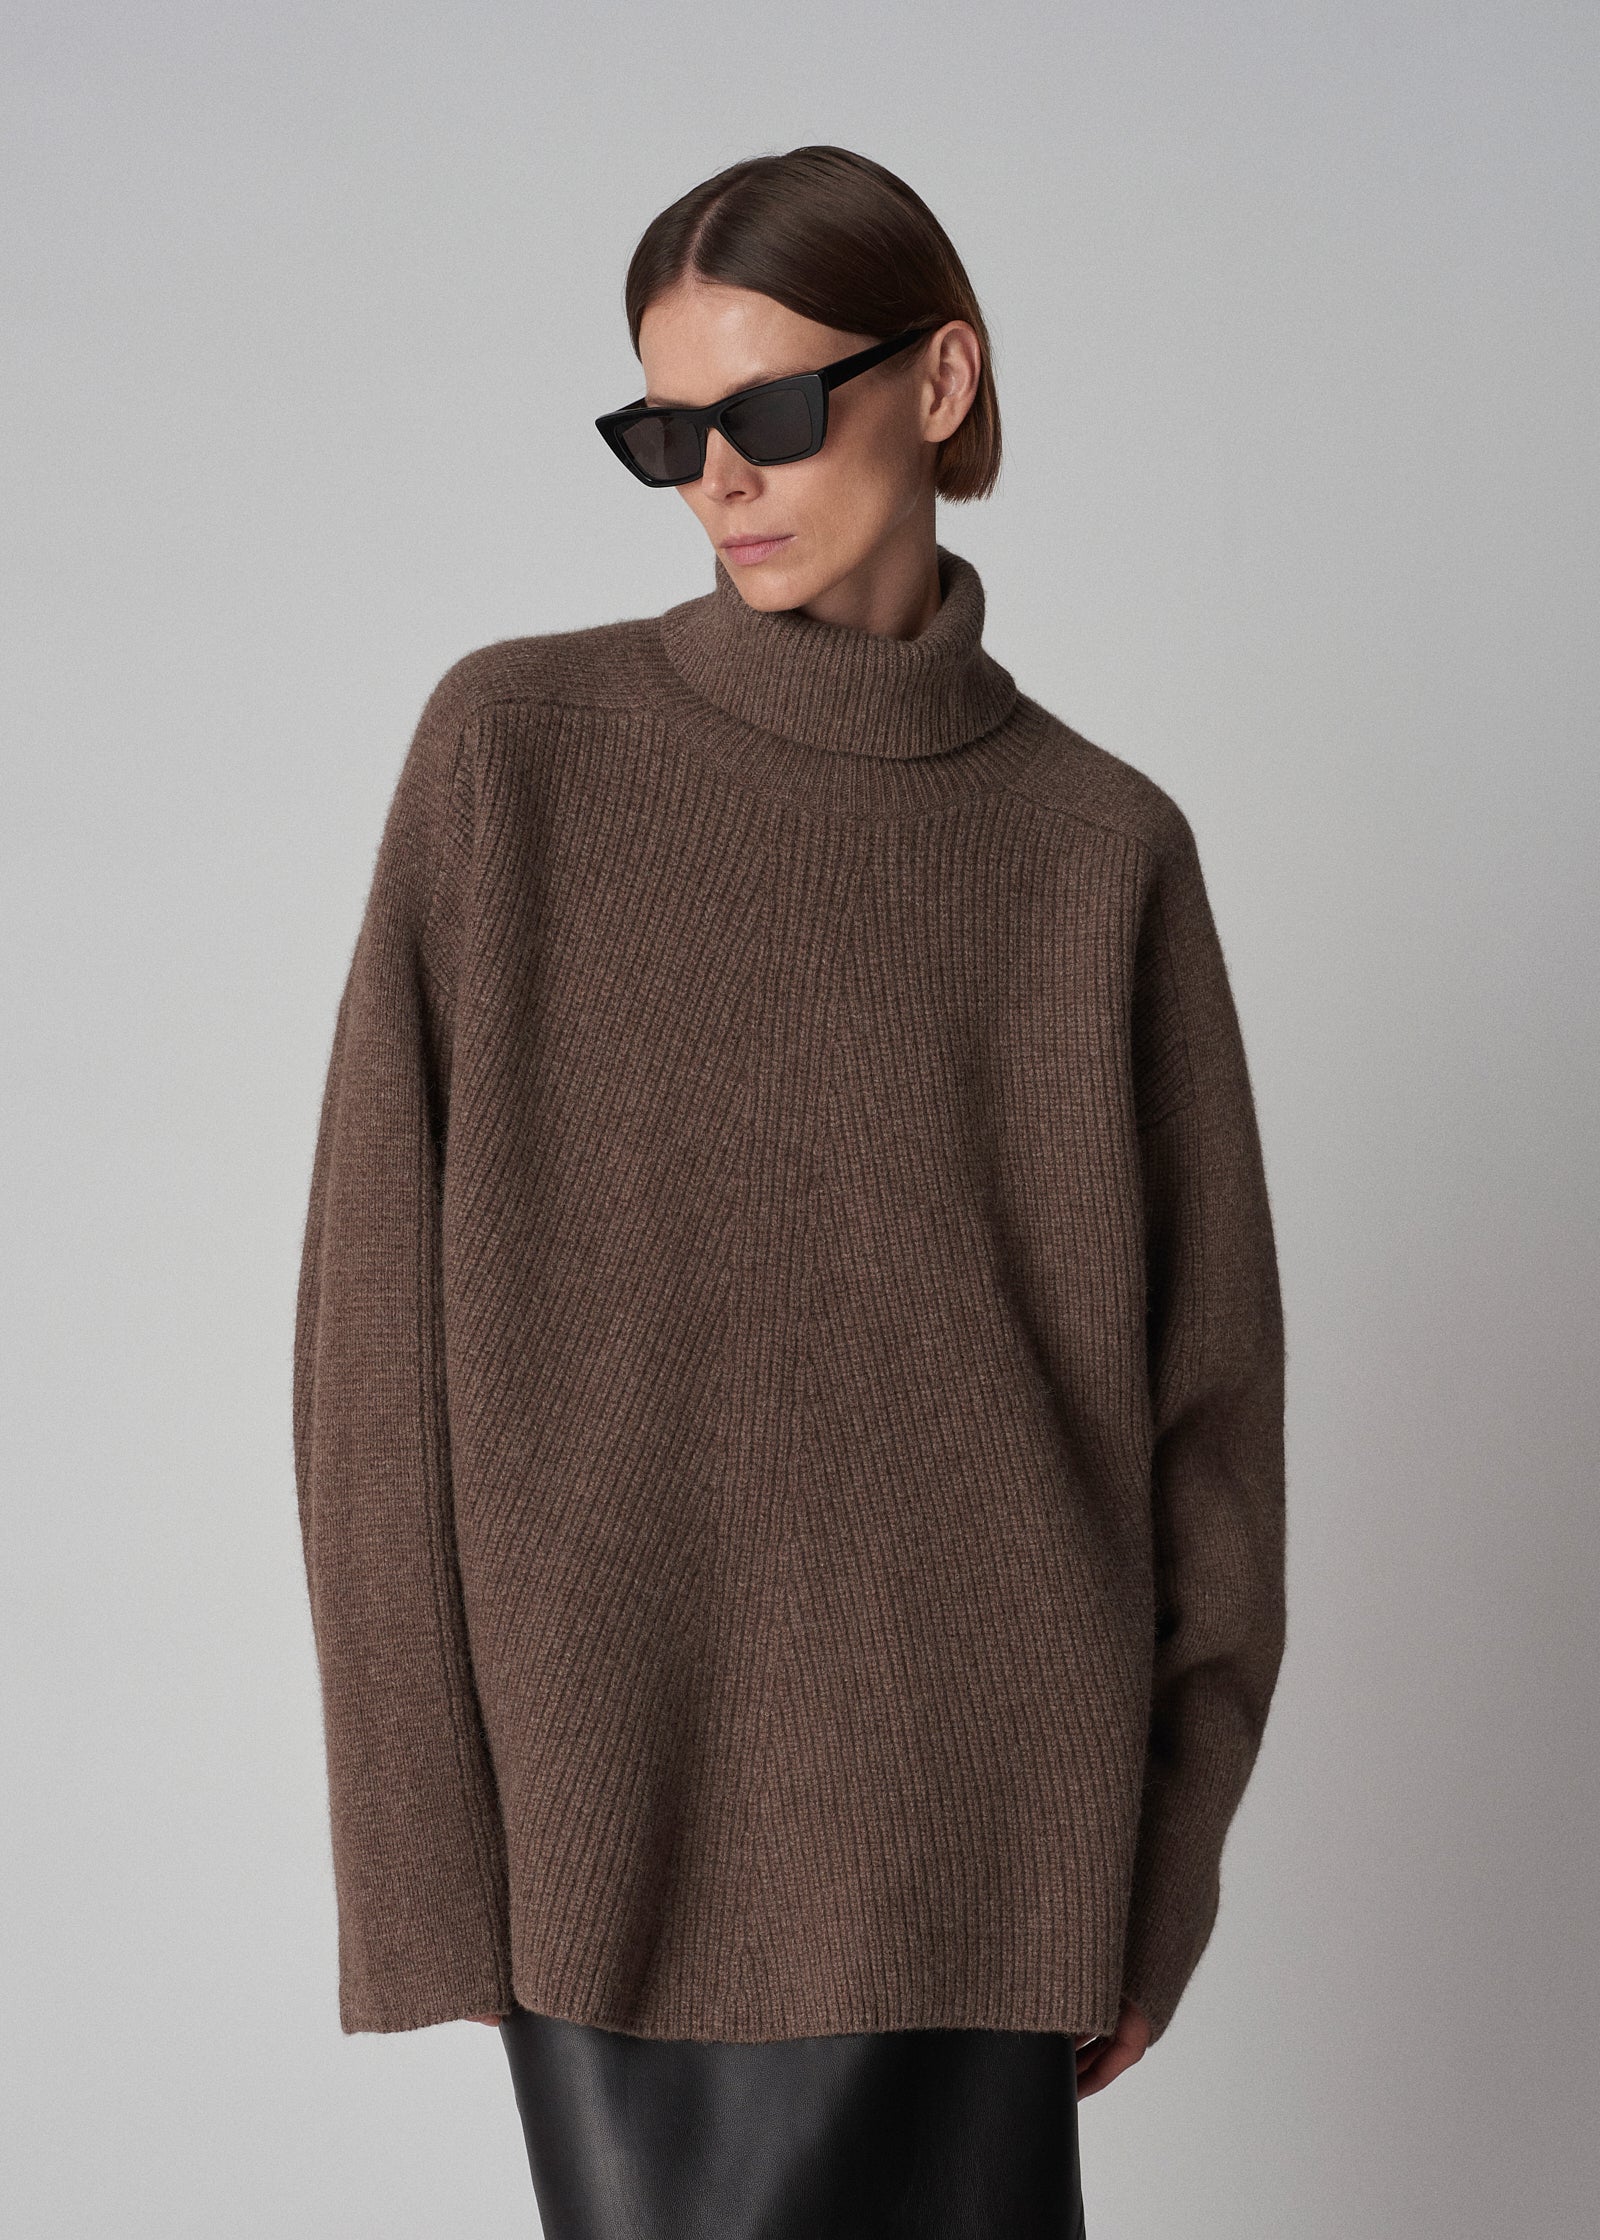 Turtleneck Sweater in Yak Wool - Brown Melange - CO Collections